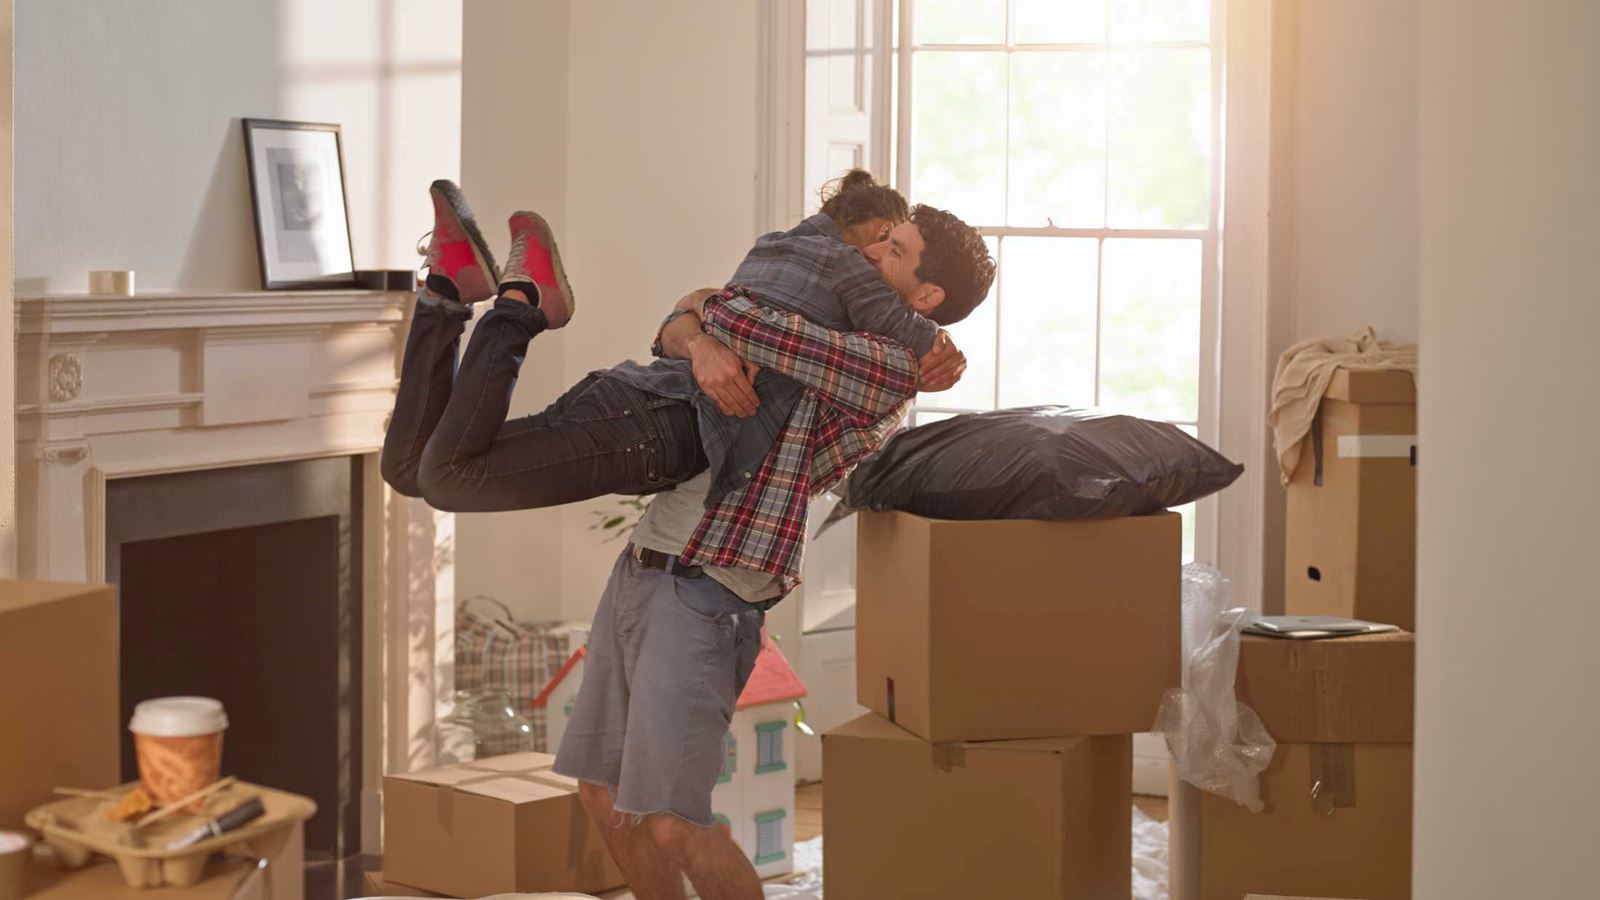 Couple hugging in a house surrounding by moving boxes